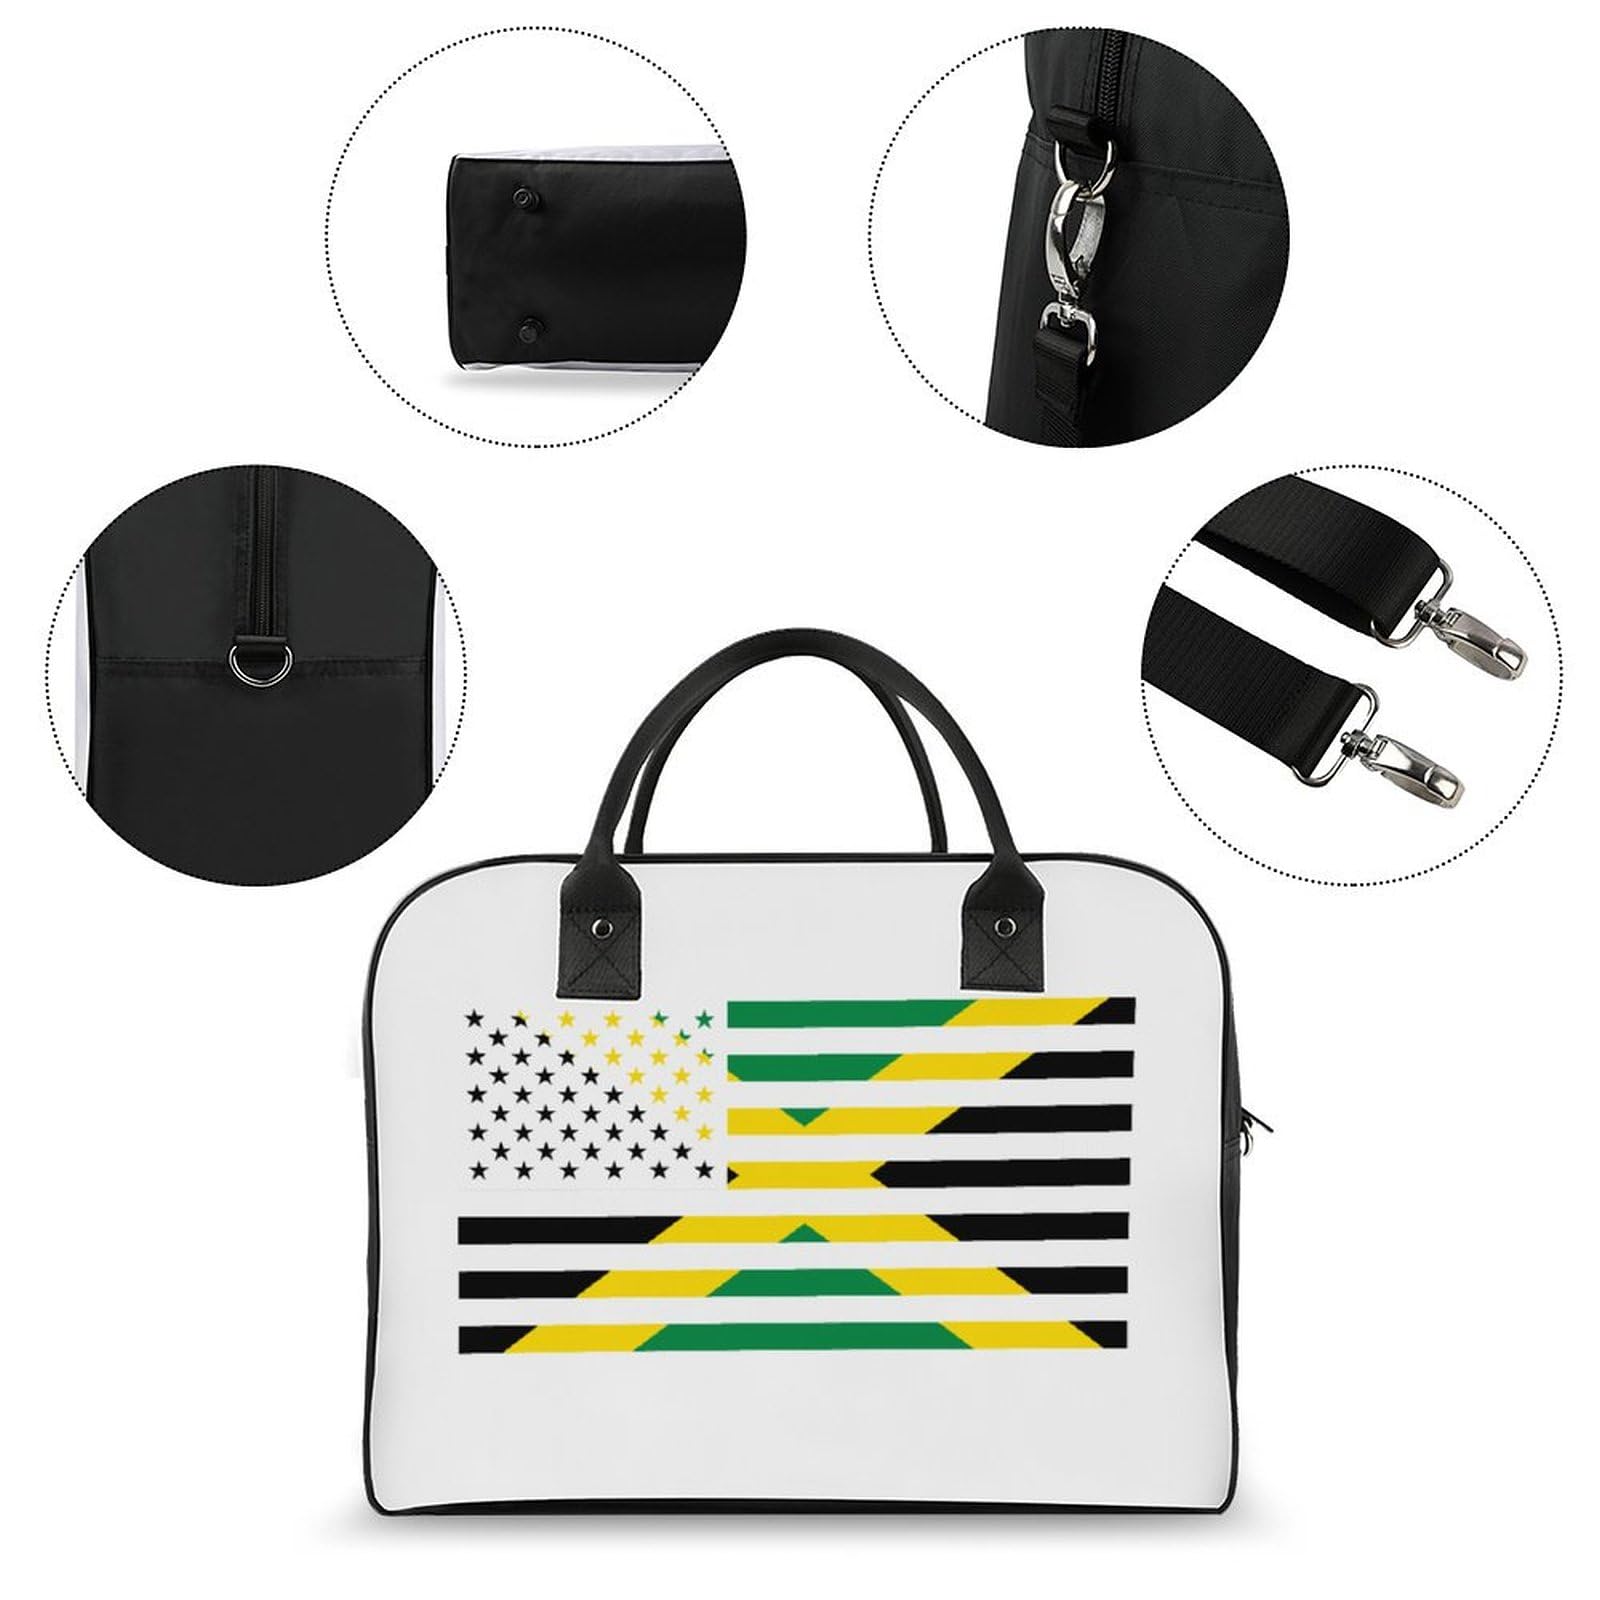 Jamaica American Flag Large Crossbody Bag Laptop Bags Shoulder Handbags Tote with Strap for Travel Office